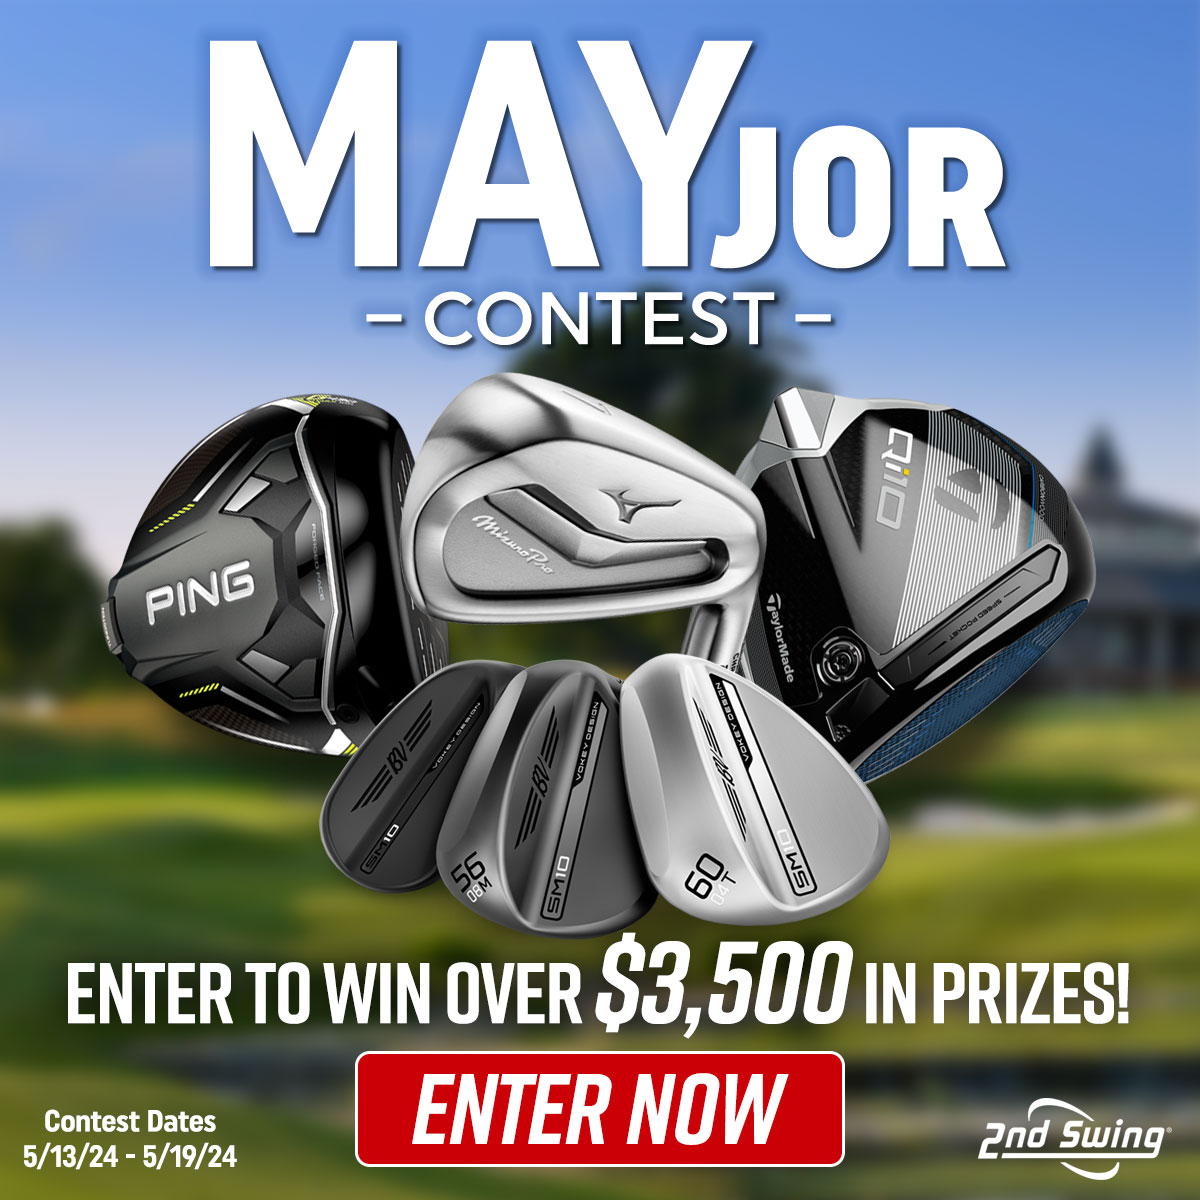 The year's 2nd Major tees off tomorrow so don't forget to enter our MAYjor Contest! ⛳ Enter for a chance to win over $3500 in prizes including custom fit clubs! 🏌️ Submit your entry here: bit.ly/48vKJhL #2ndswinggolf #golf